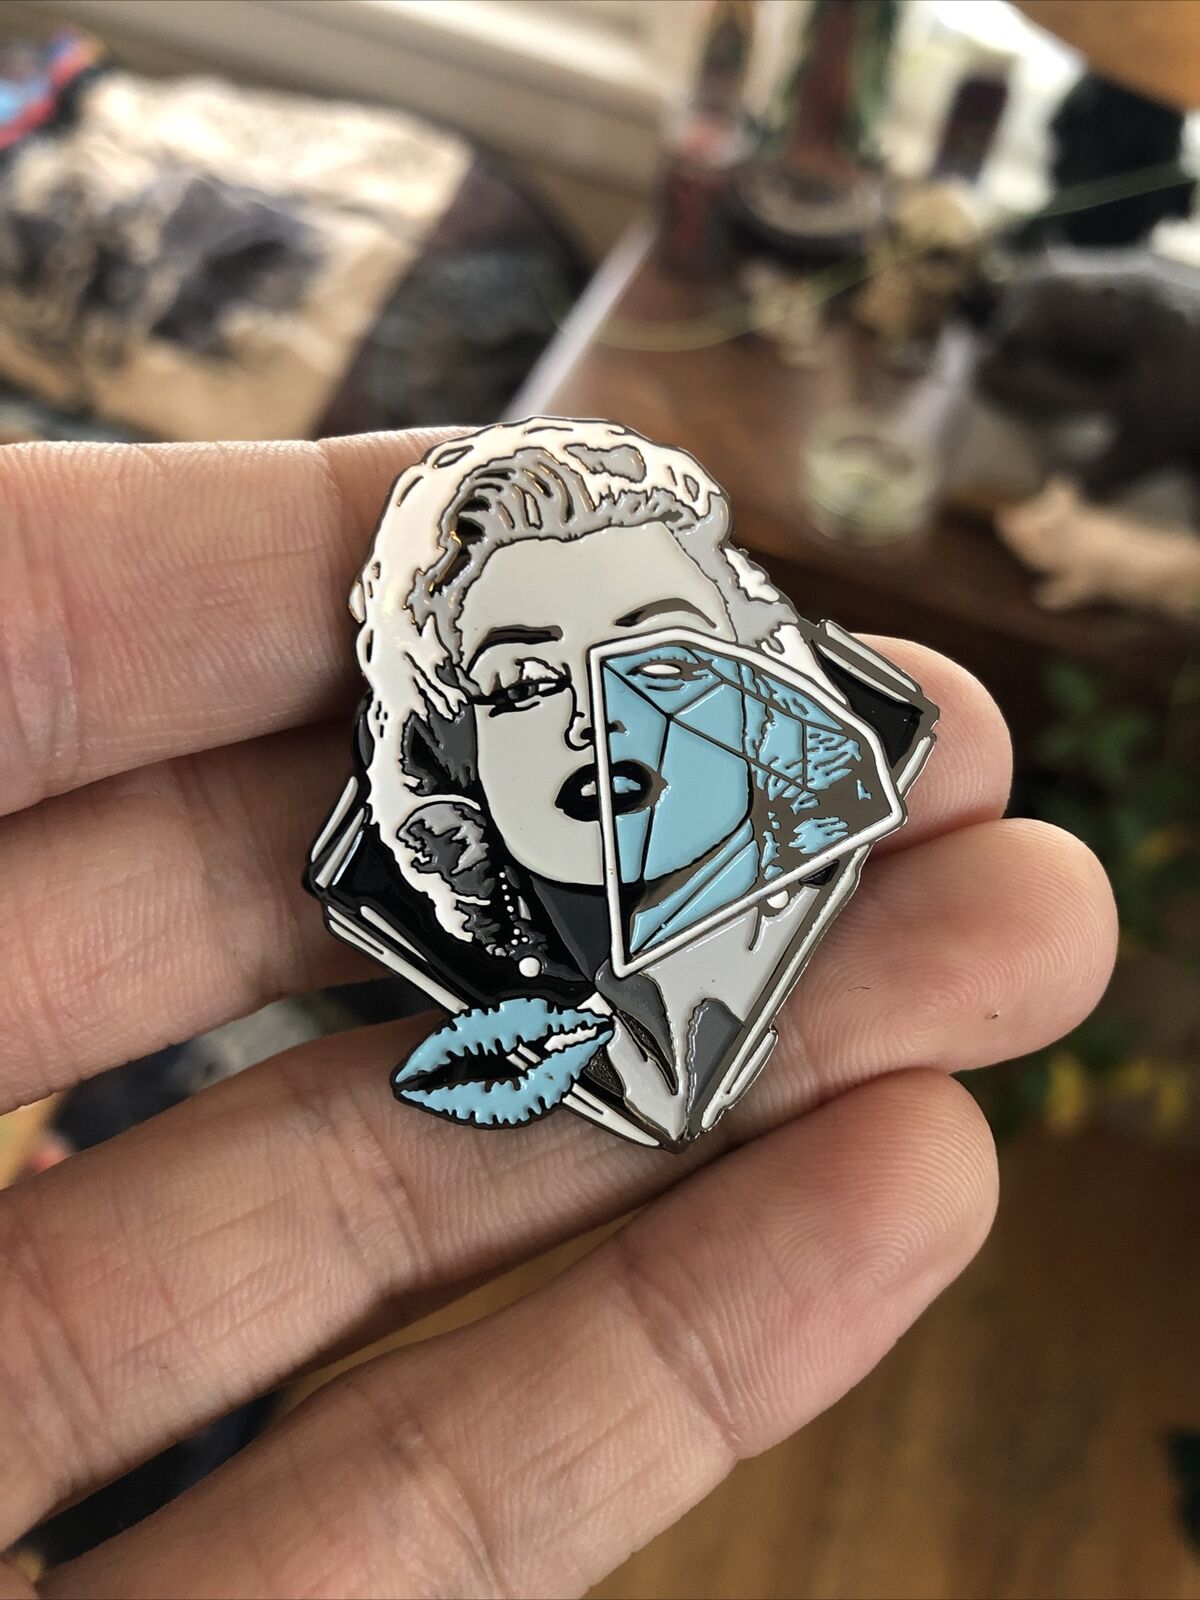 Marilyn Monroe Pin Up Collectible Artwork metal Enamel pin for a hat or backpack